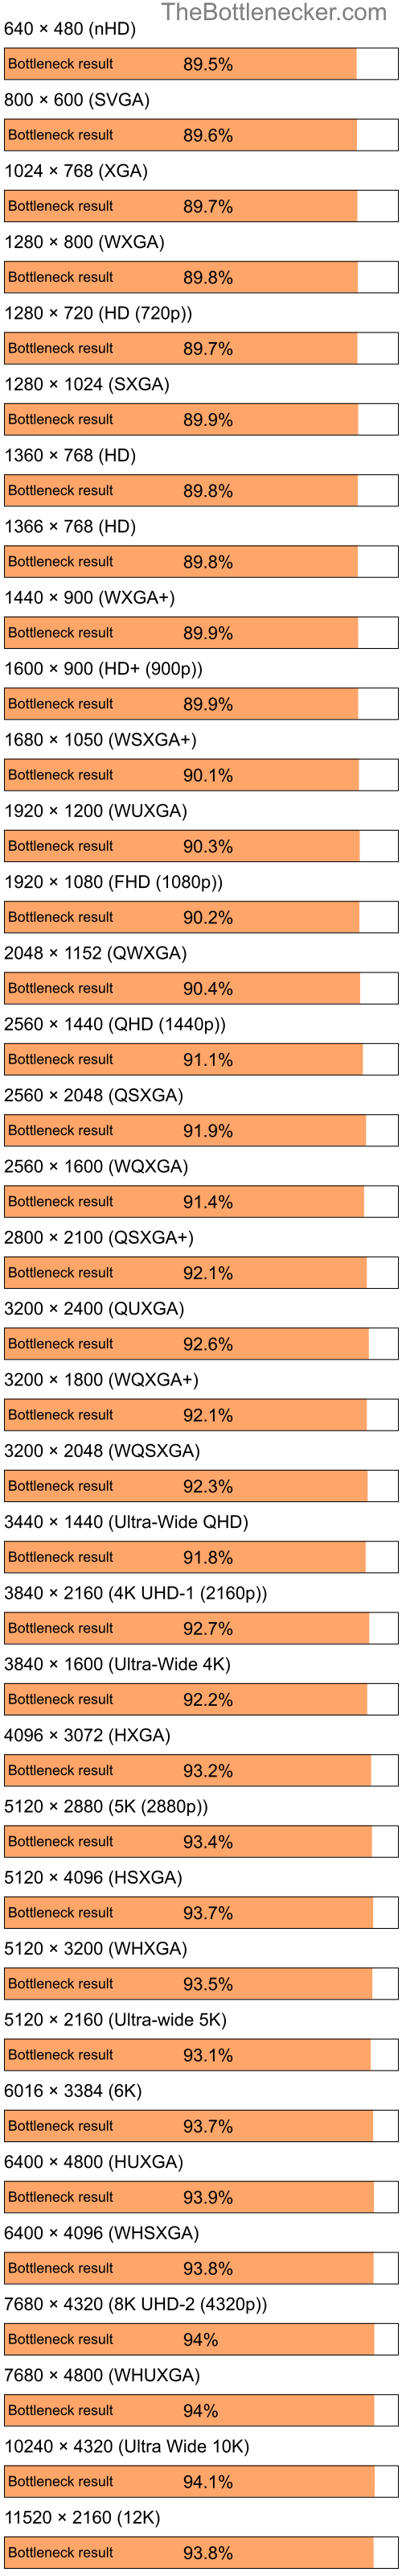 Bottleneck results by resolution for Intel Pentium 4 and NVIDIA GeForce4 MX 440 in General Tasks